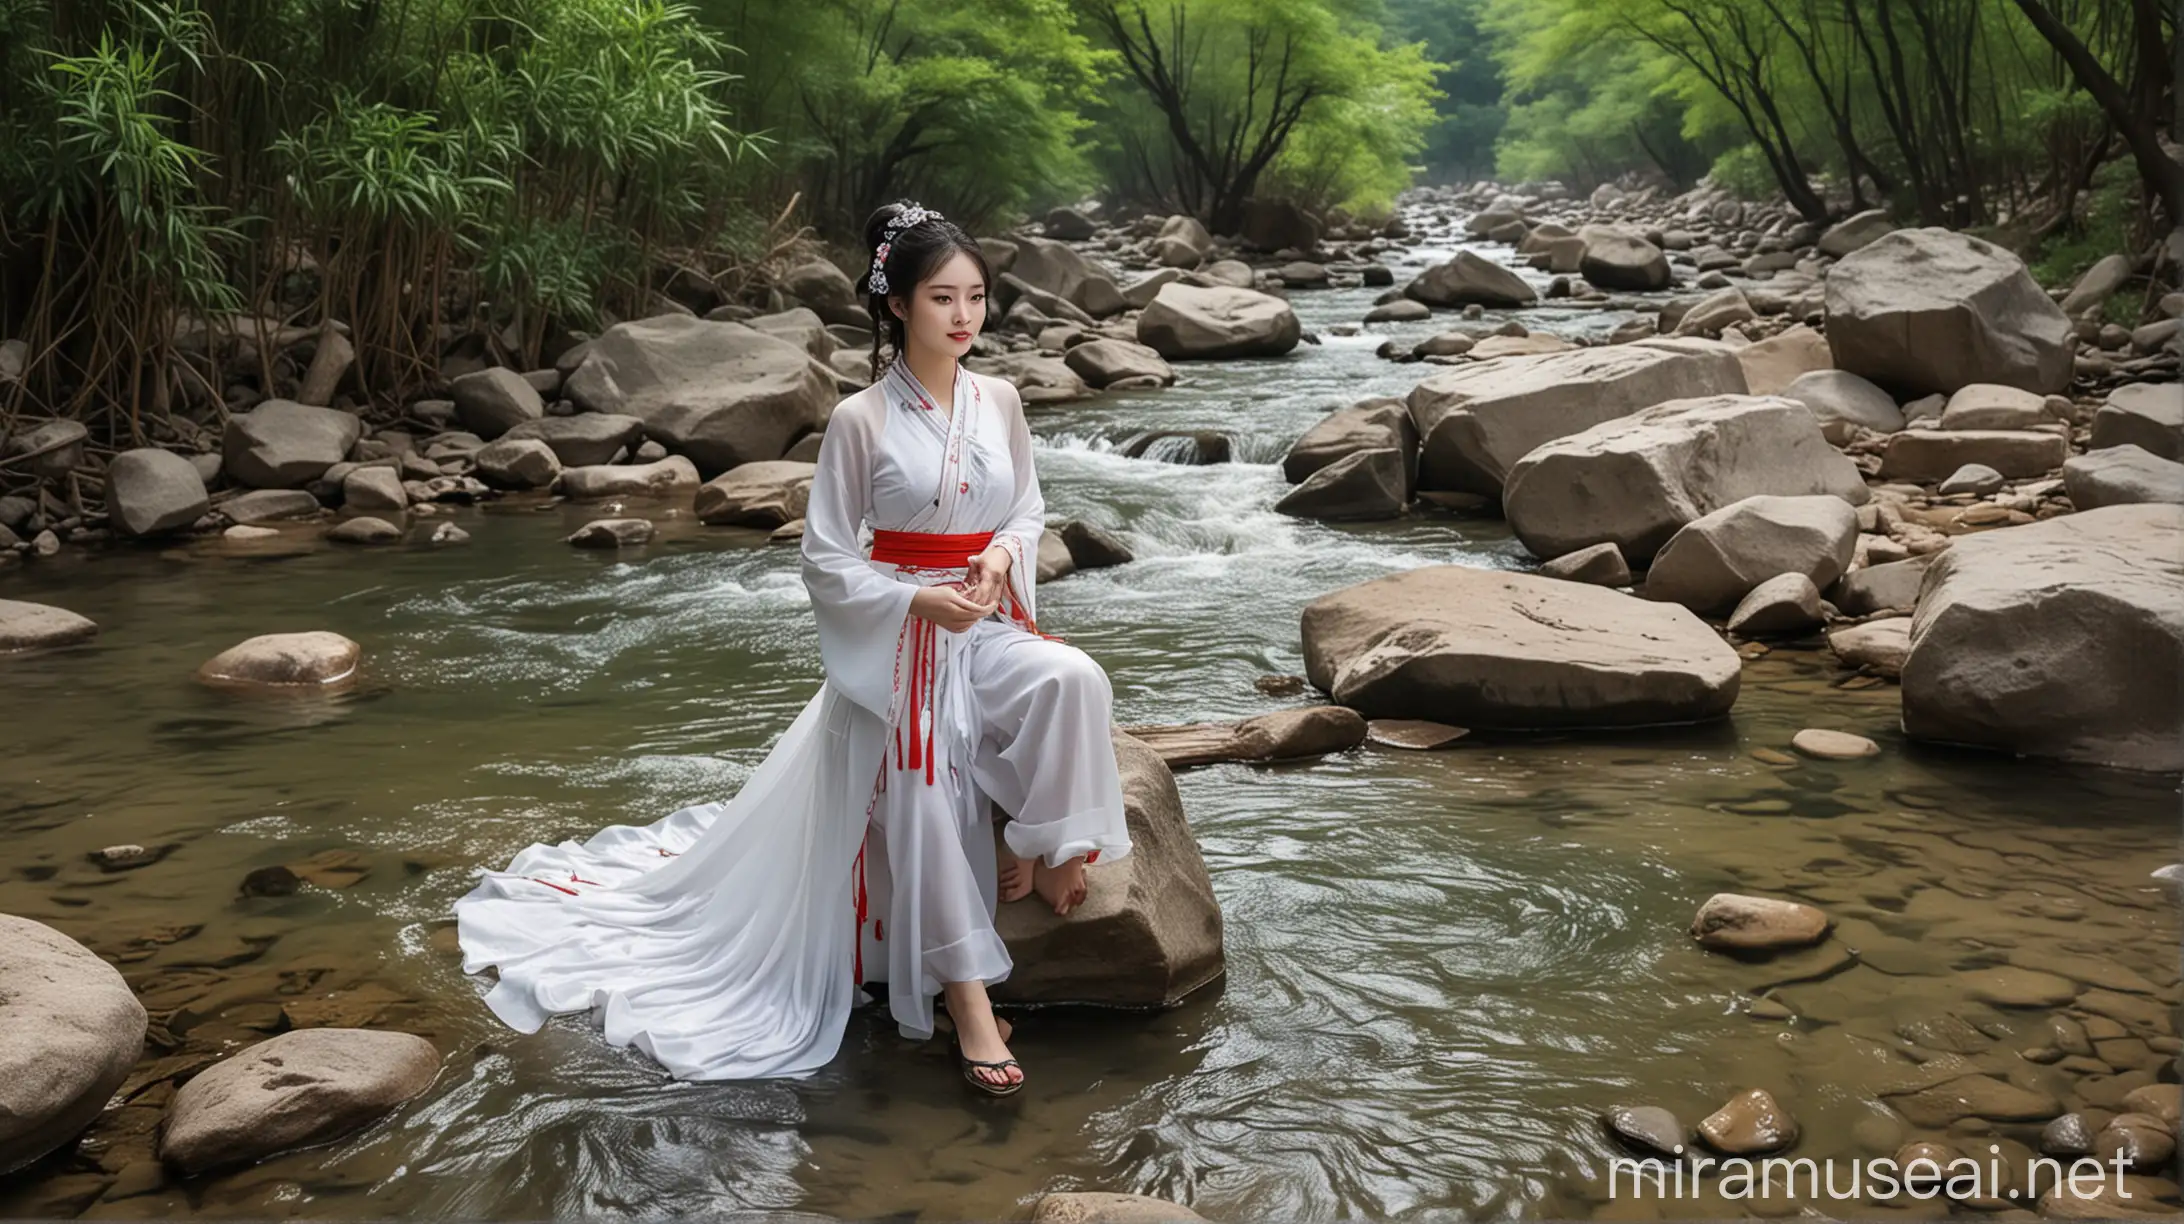 Serene Chinese Woman by a Mountain Stream Tranquil Beauty Amidst Nature